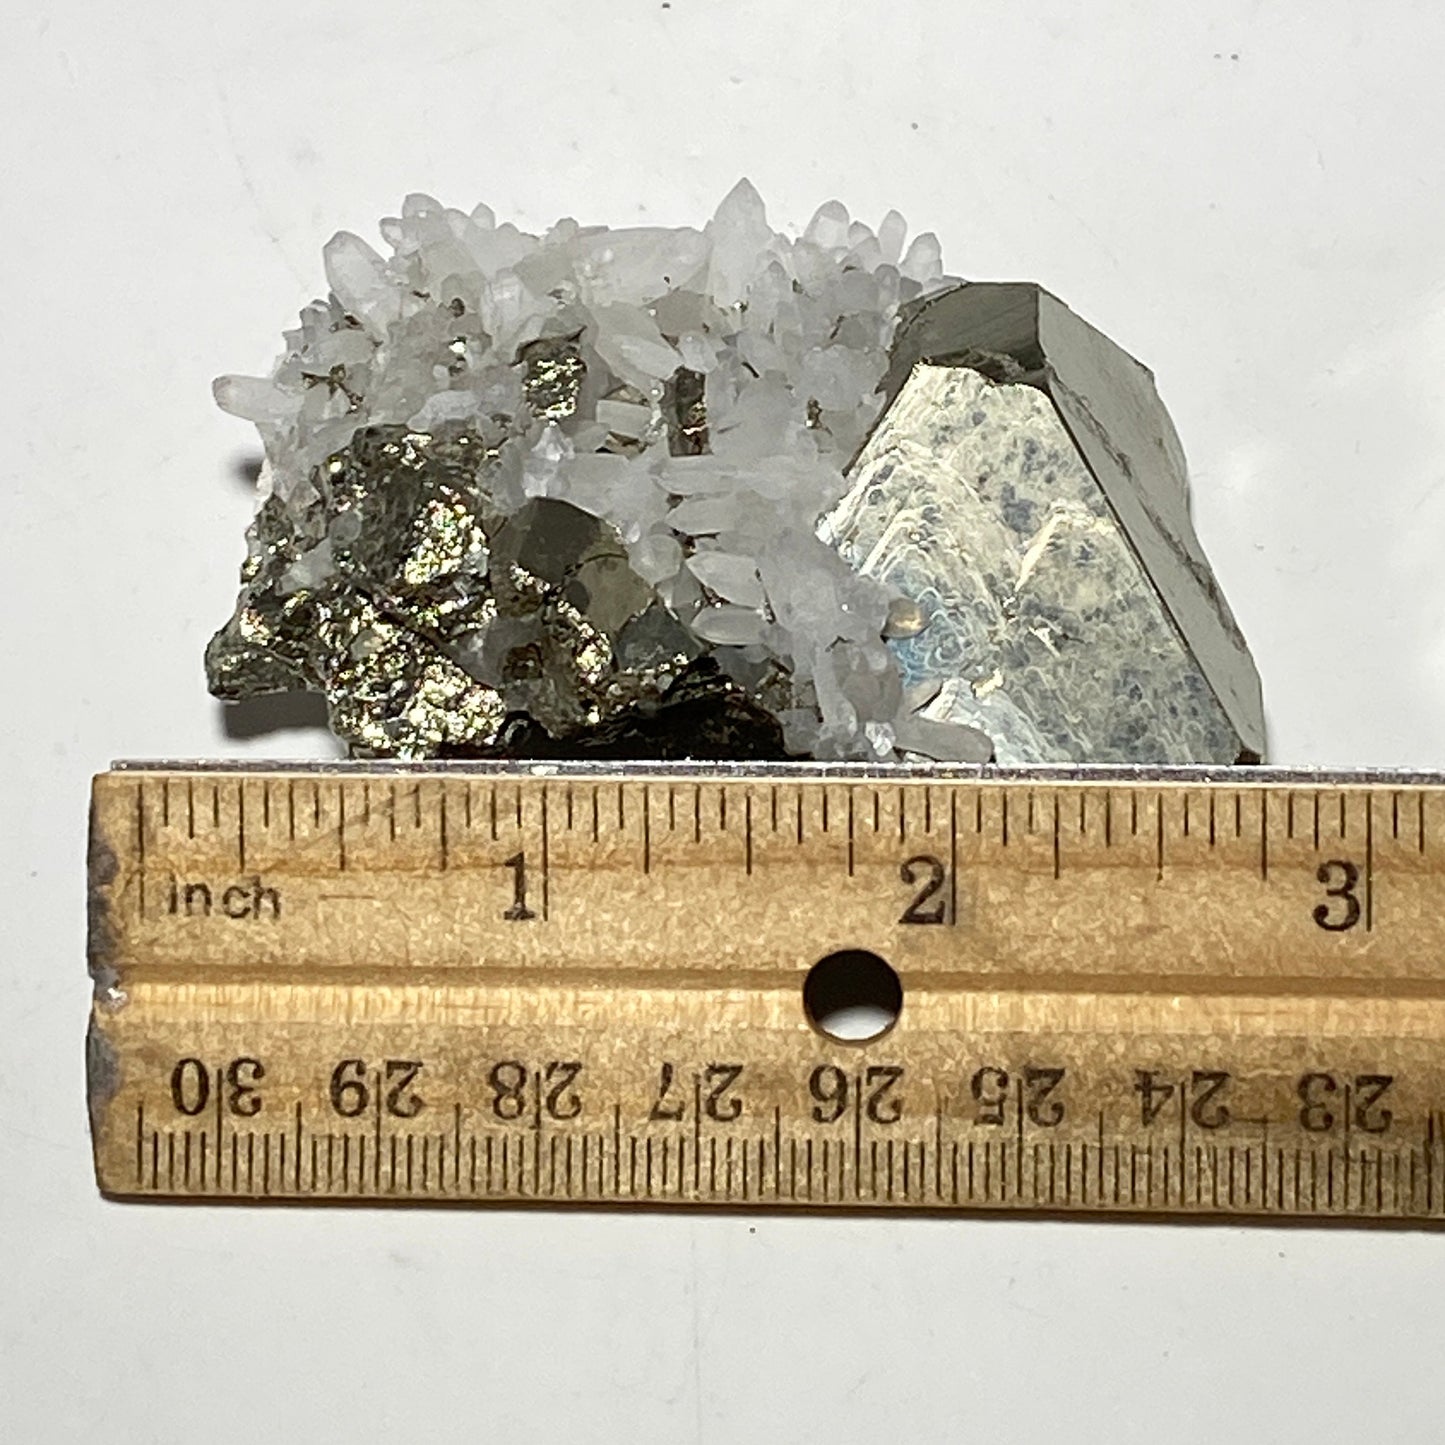 Peruvian Pyrite with Quartz Crystals | Great Peru Mineral for a rock collection or great gift for a rock lover